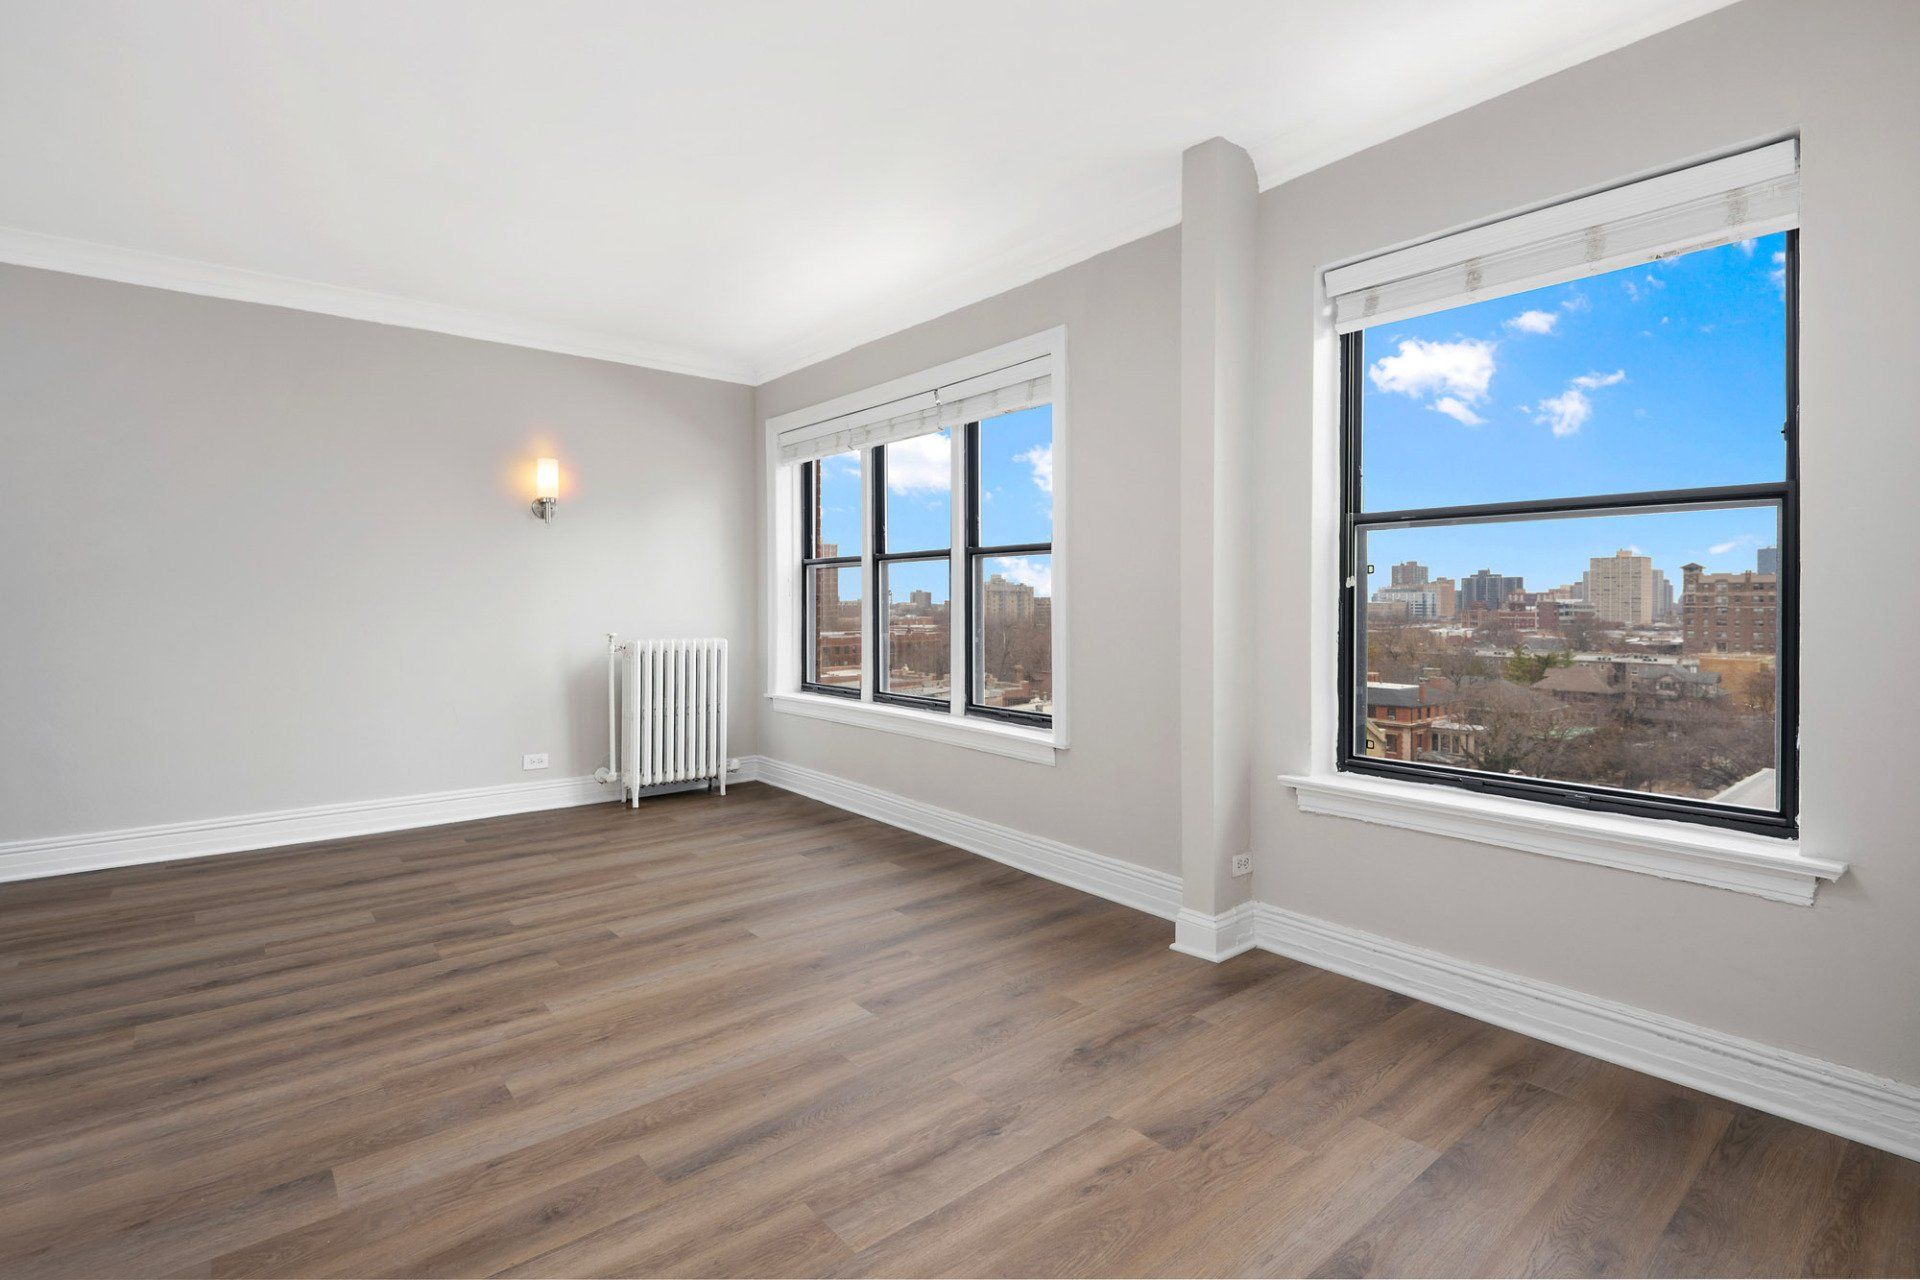 An empty living room with hardwood floors and two windows at Reside on Clarendon.